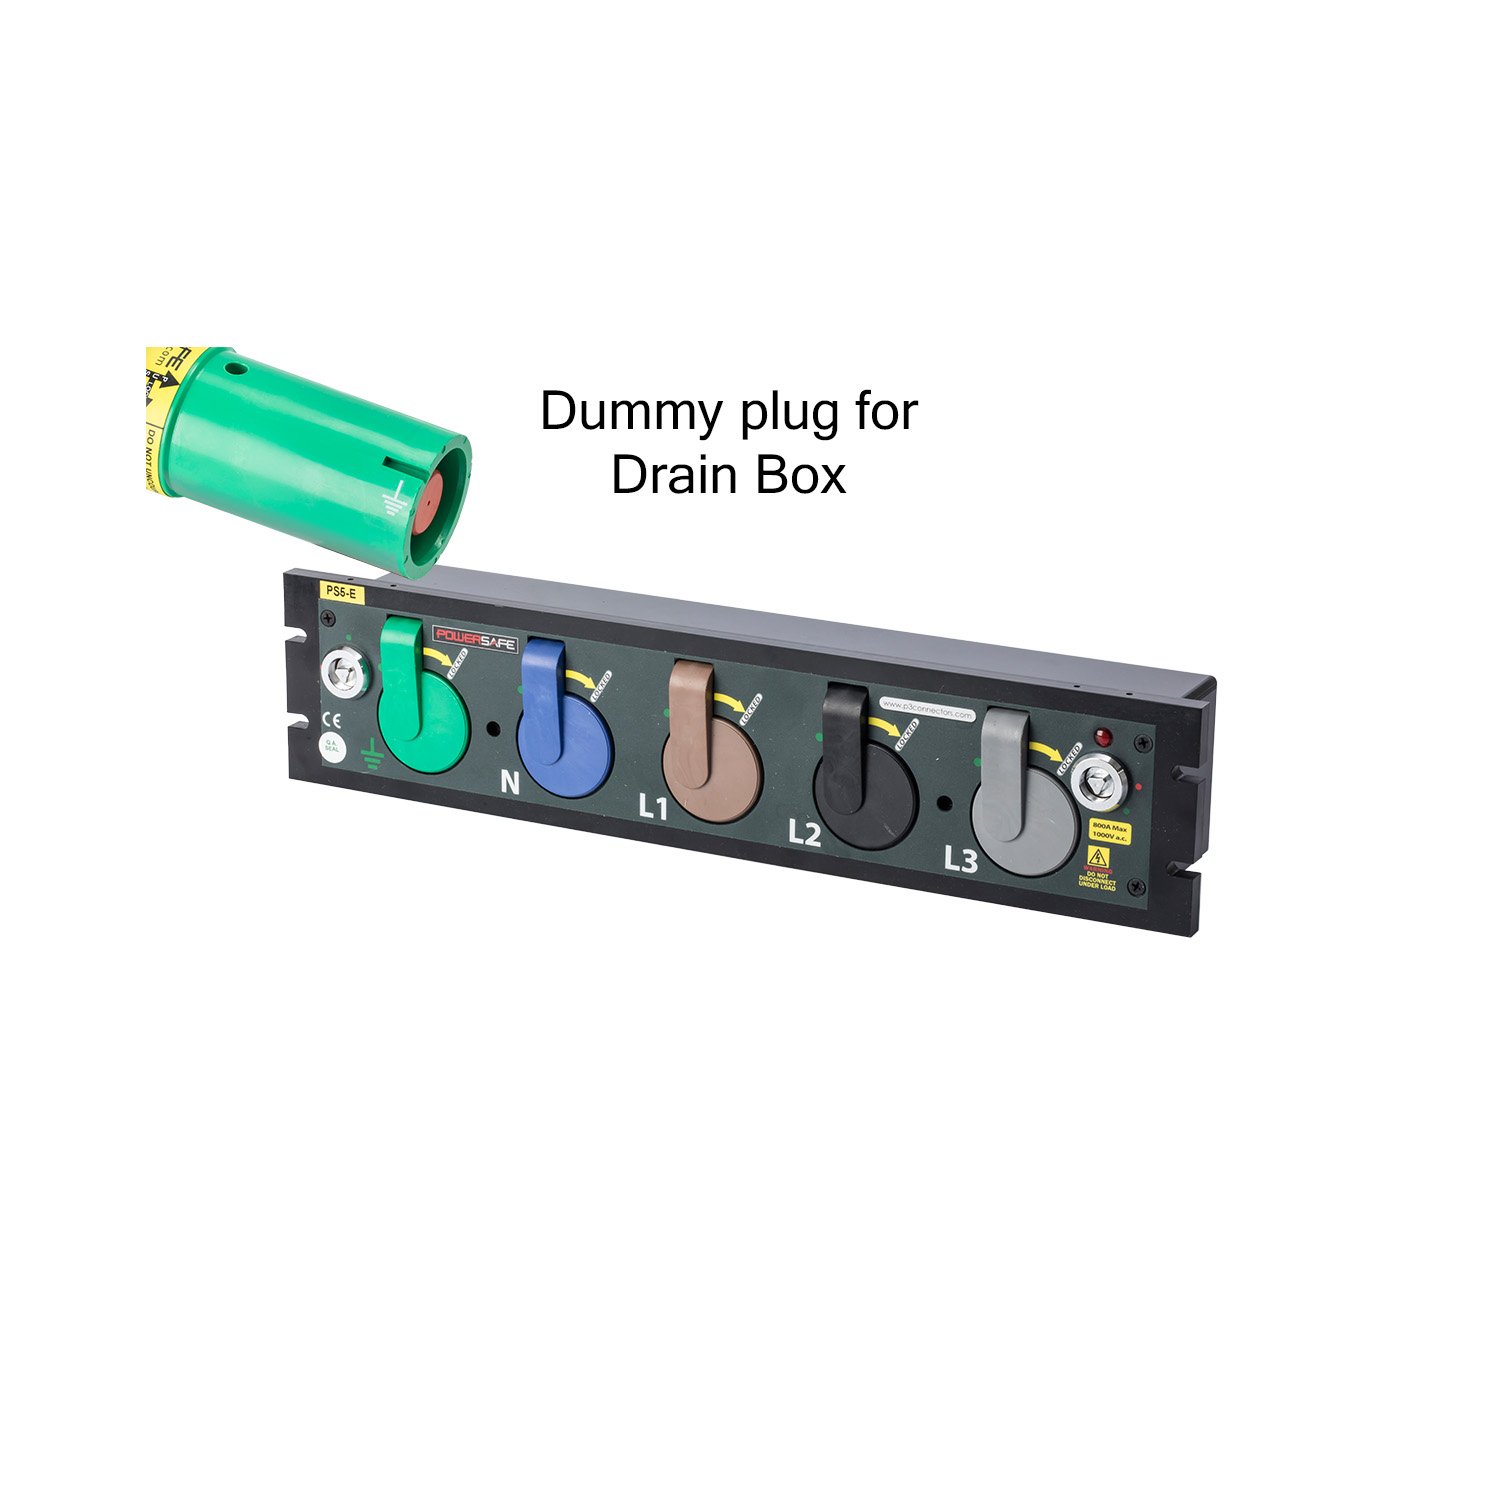 P3 DRAIN BOX Dummy PLUG E-GN to use Sequential box without Earth lead